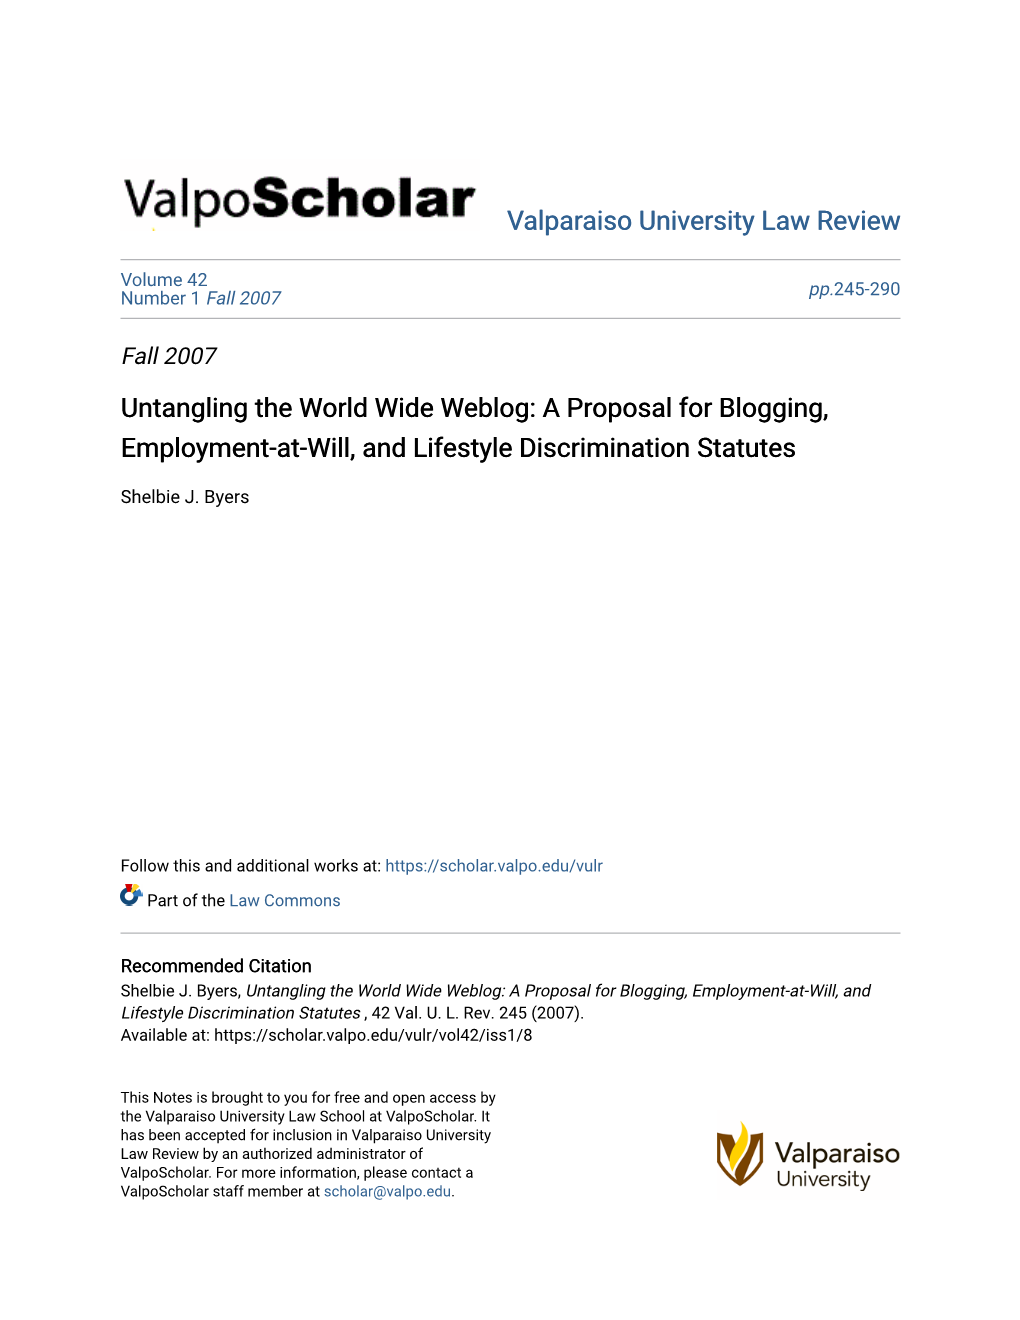 Untangling the World Wide Weblog: a Proposal for Blogging, Employment-At-Will, and Lifestyle Discrimination Statutes